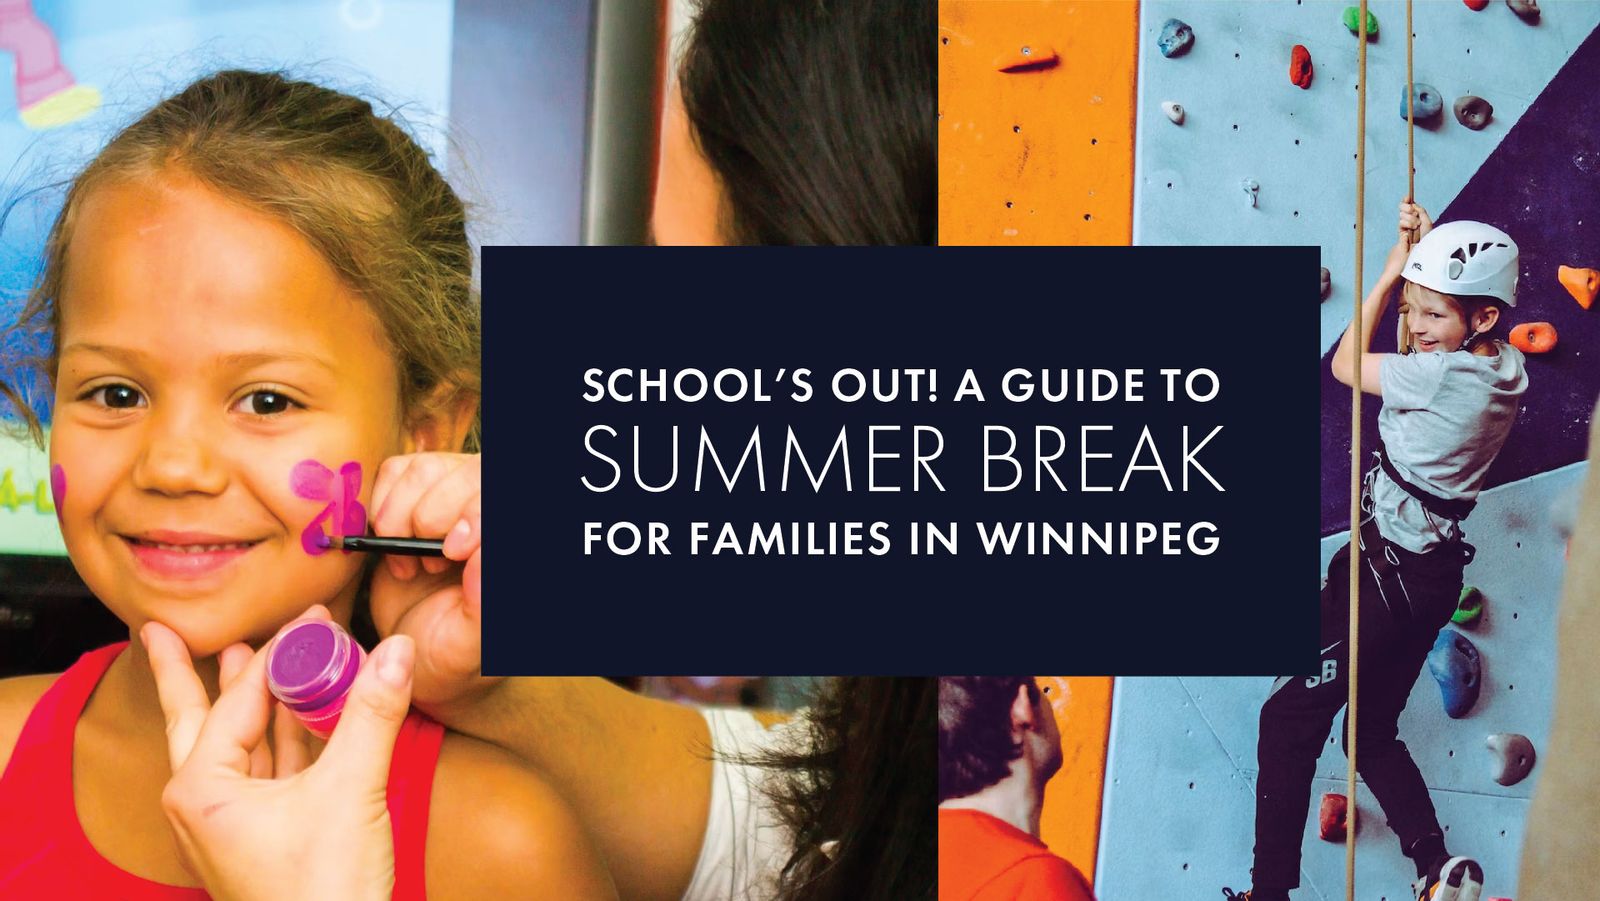 School's Out! A Guide to Summer Break for Families in Winnipeg